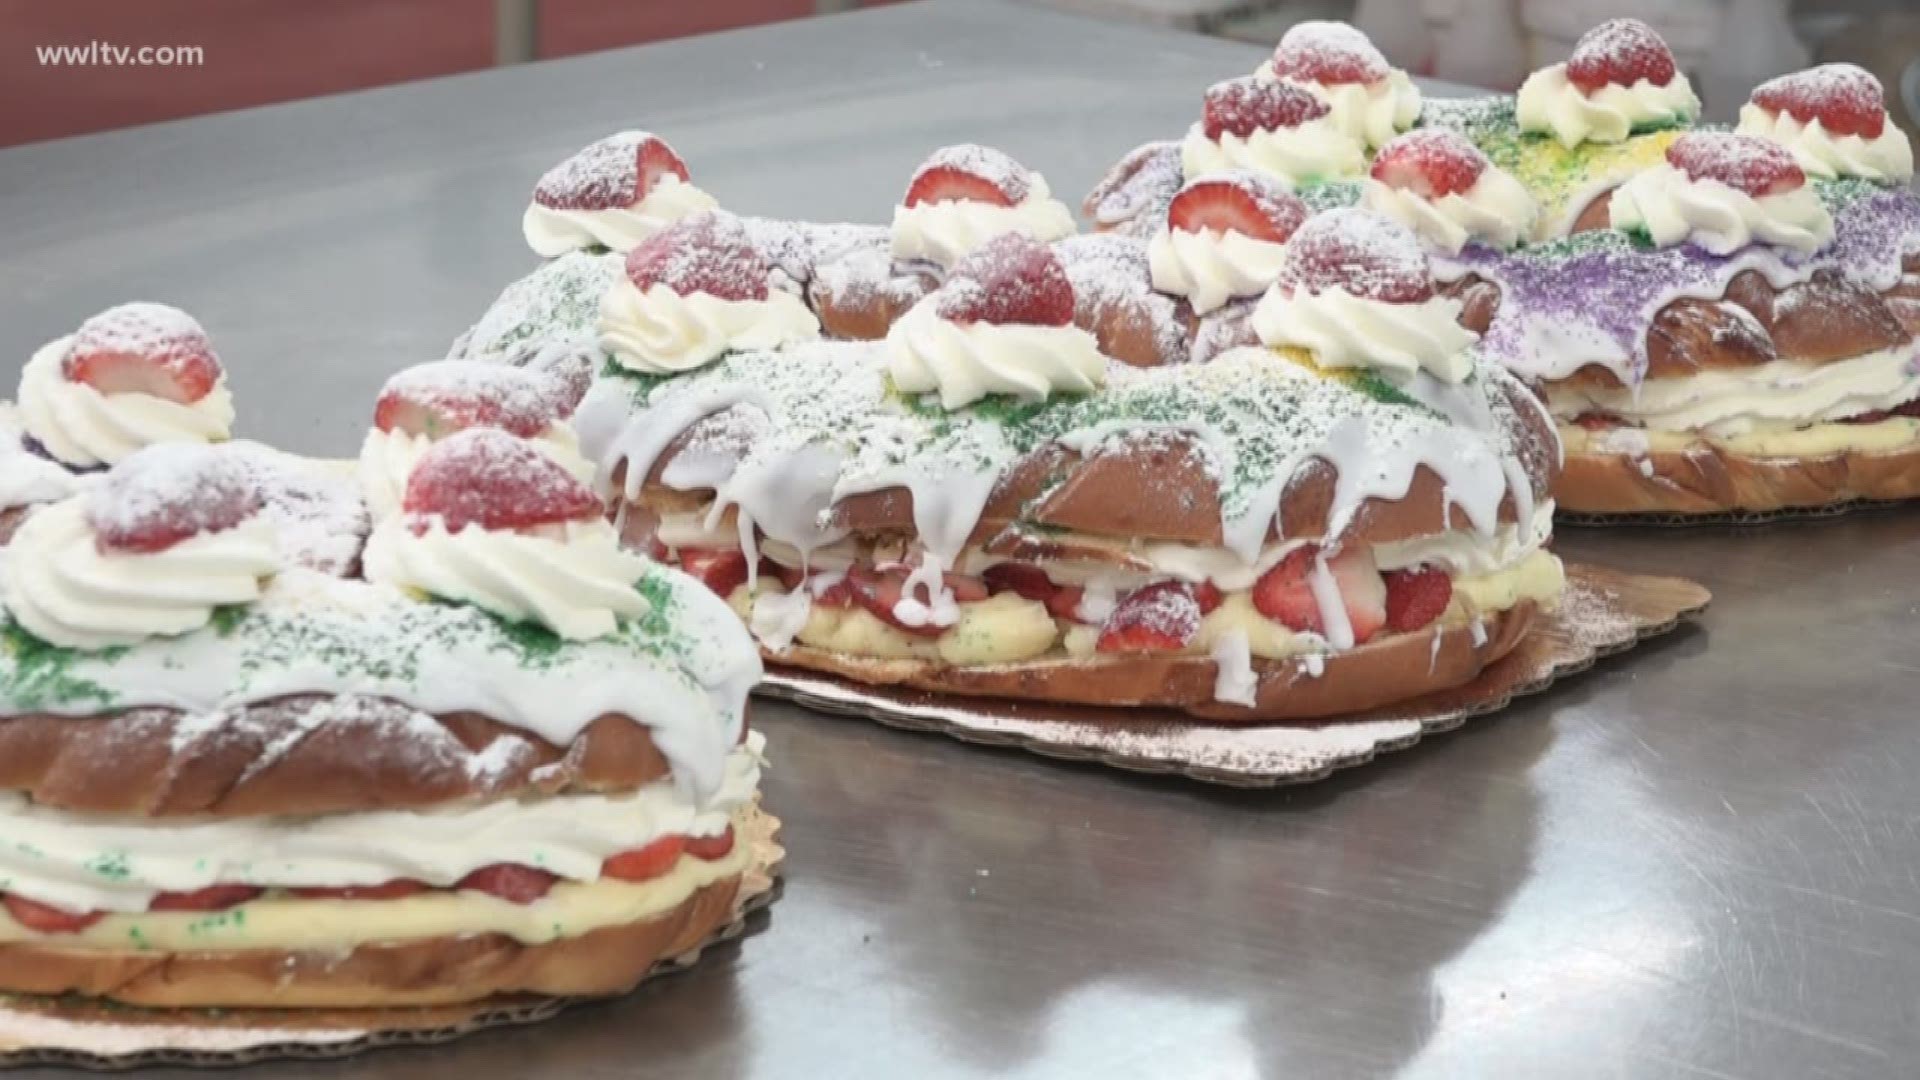 Residents are rushing in for their first king cakes of the Mardi Gras season. 